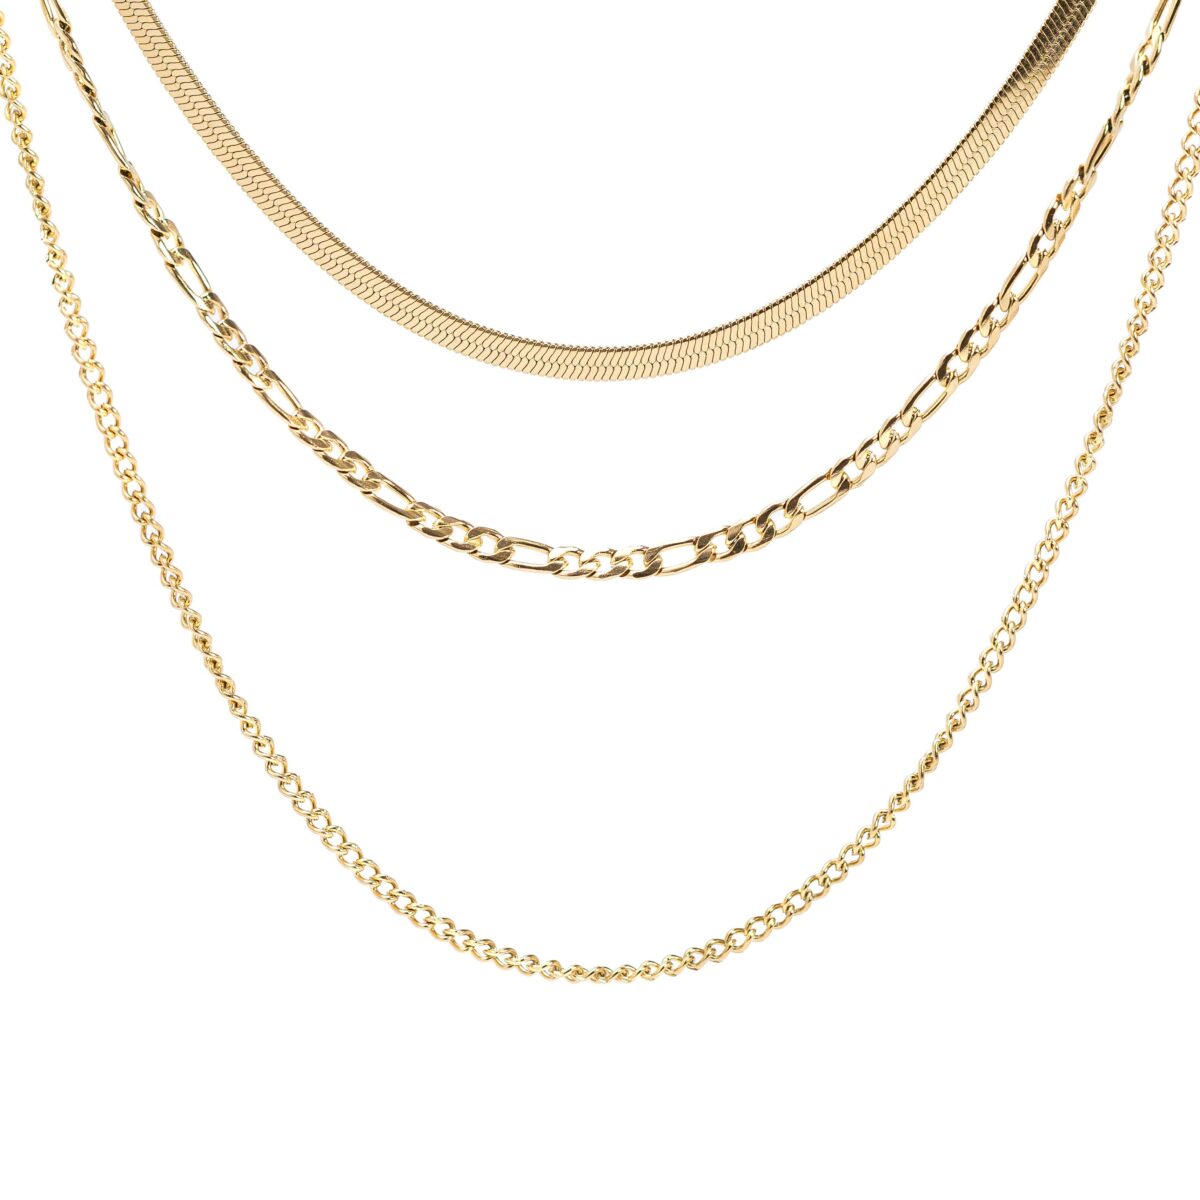 https://m.clubbella.co/product/layered-gold-chain-necklace/ Resized (9 of 134)